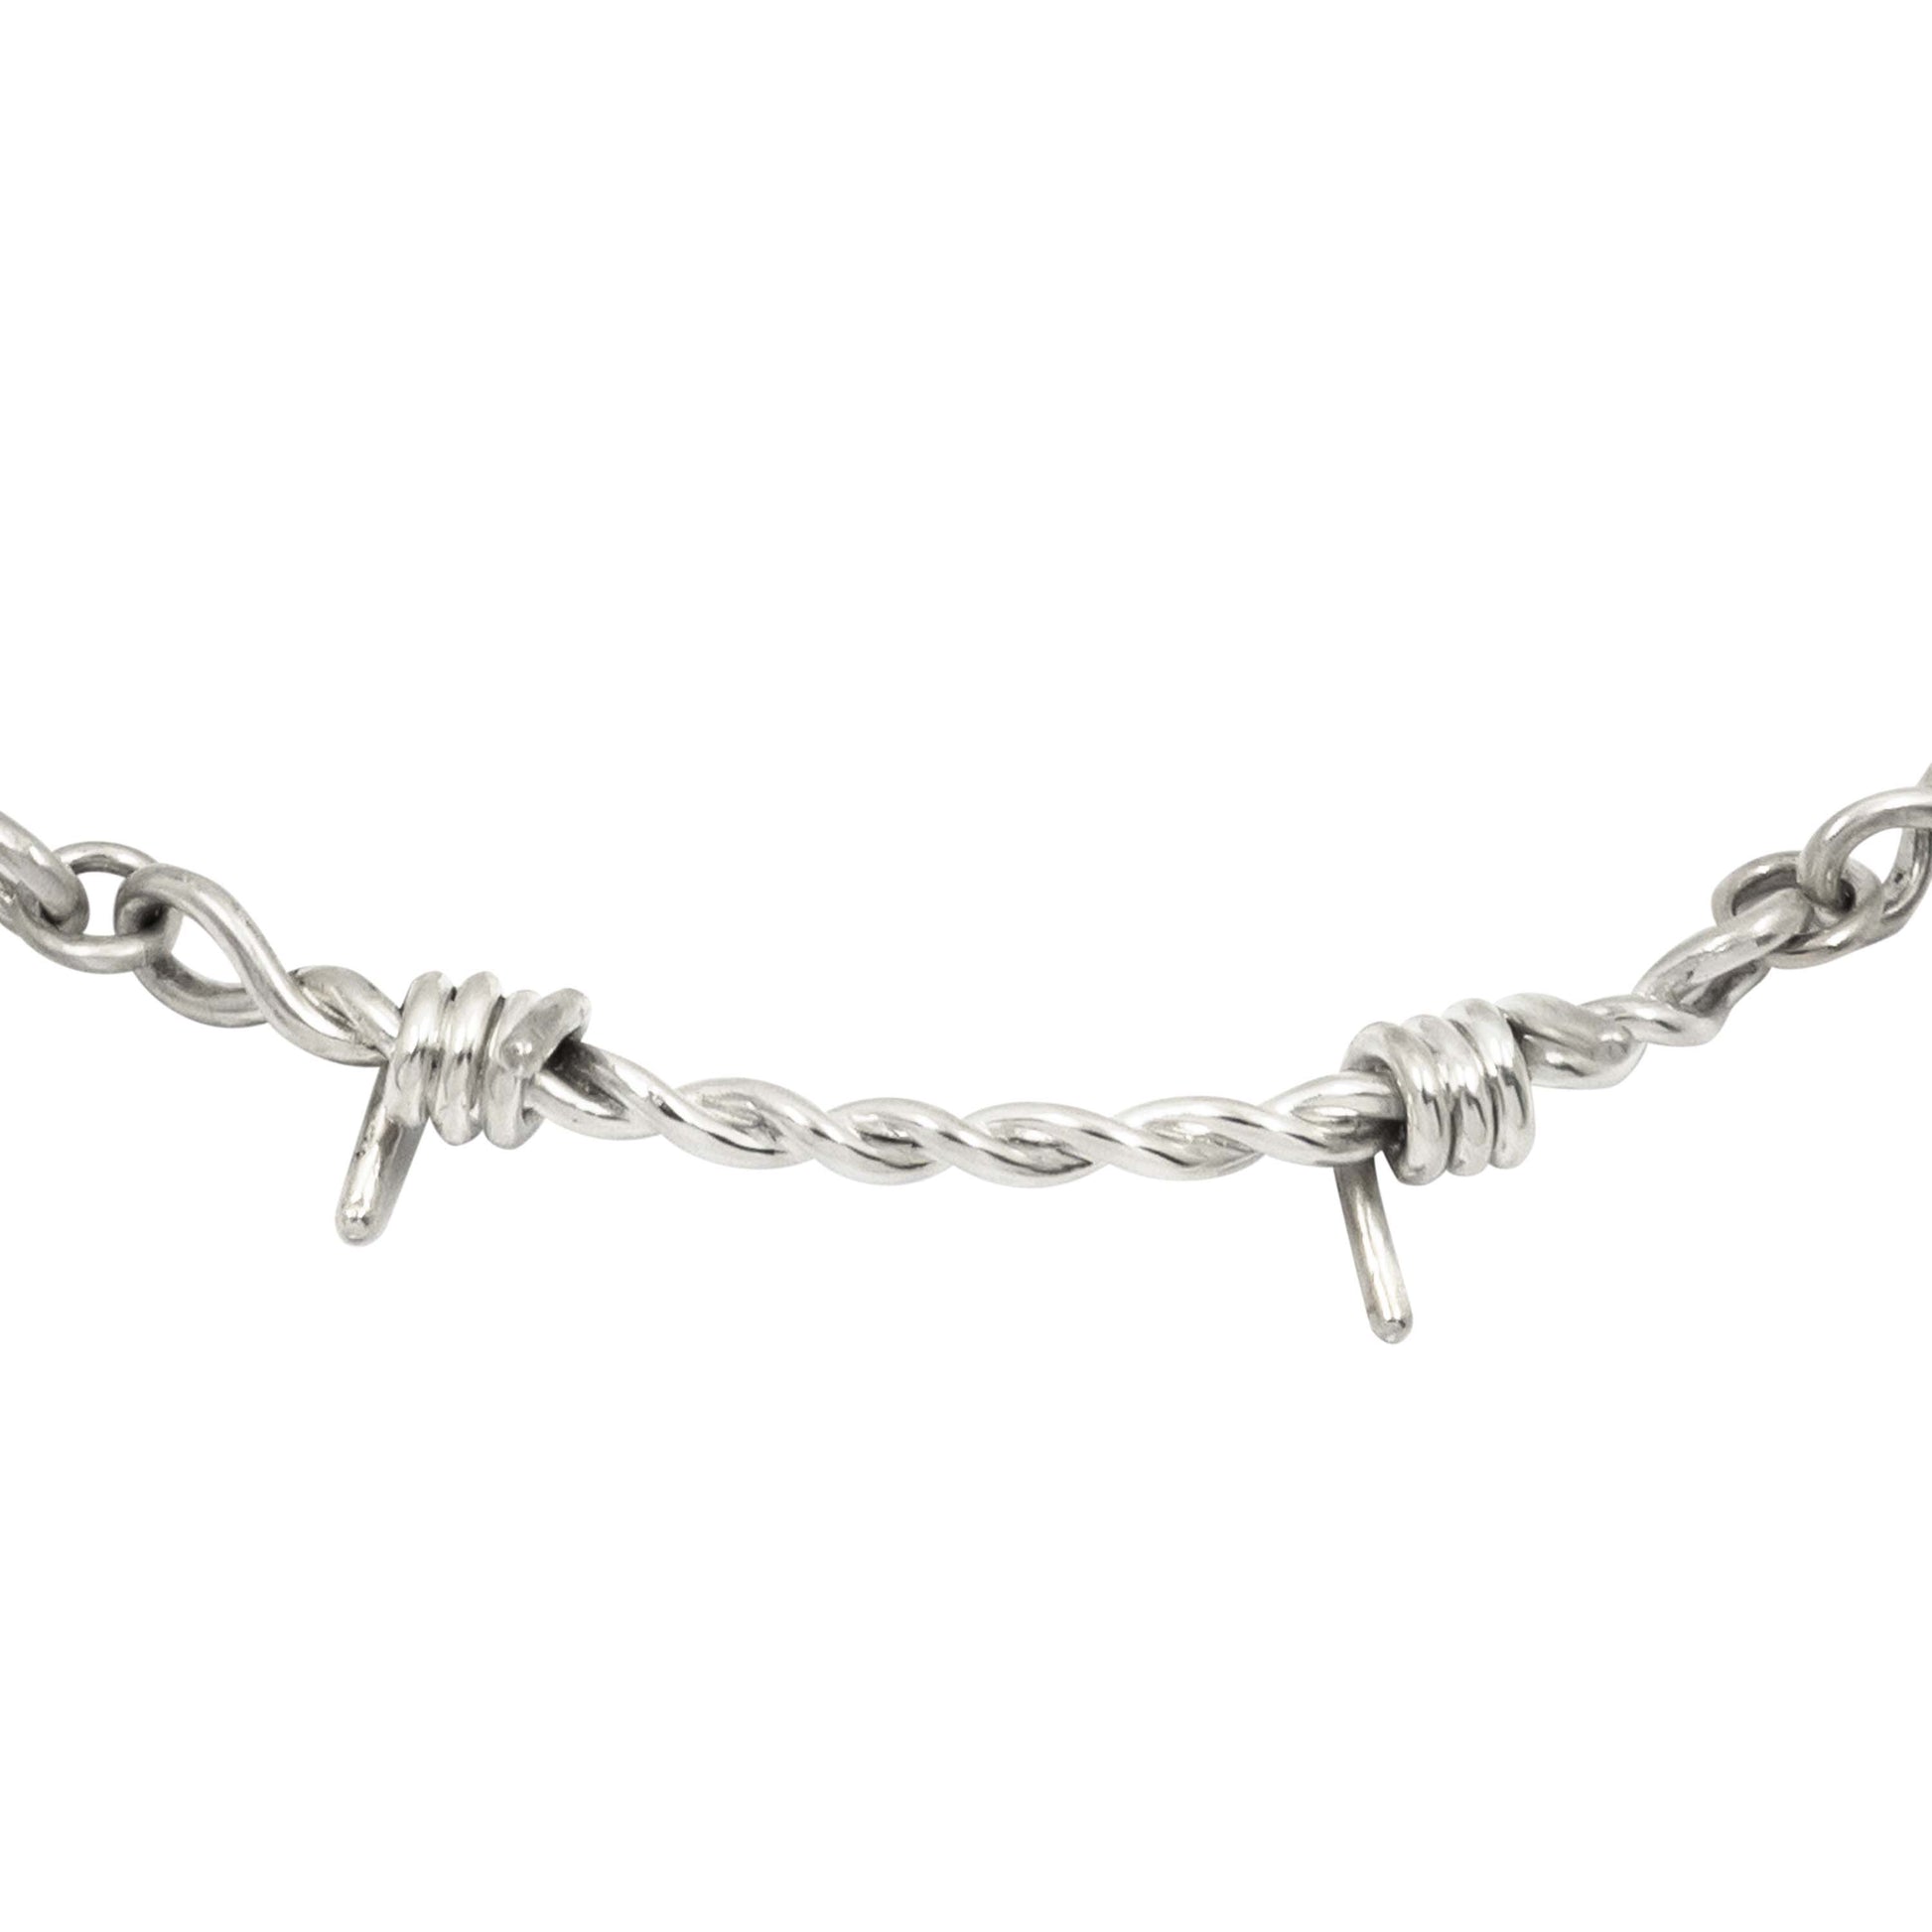 Barbed Wire Choker in Sterling Silver - Futaba Hayashi